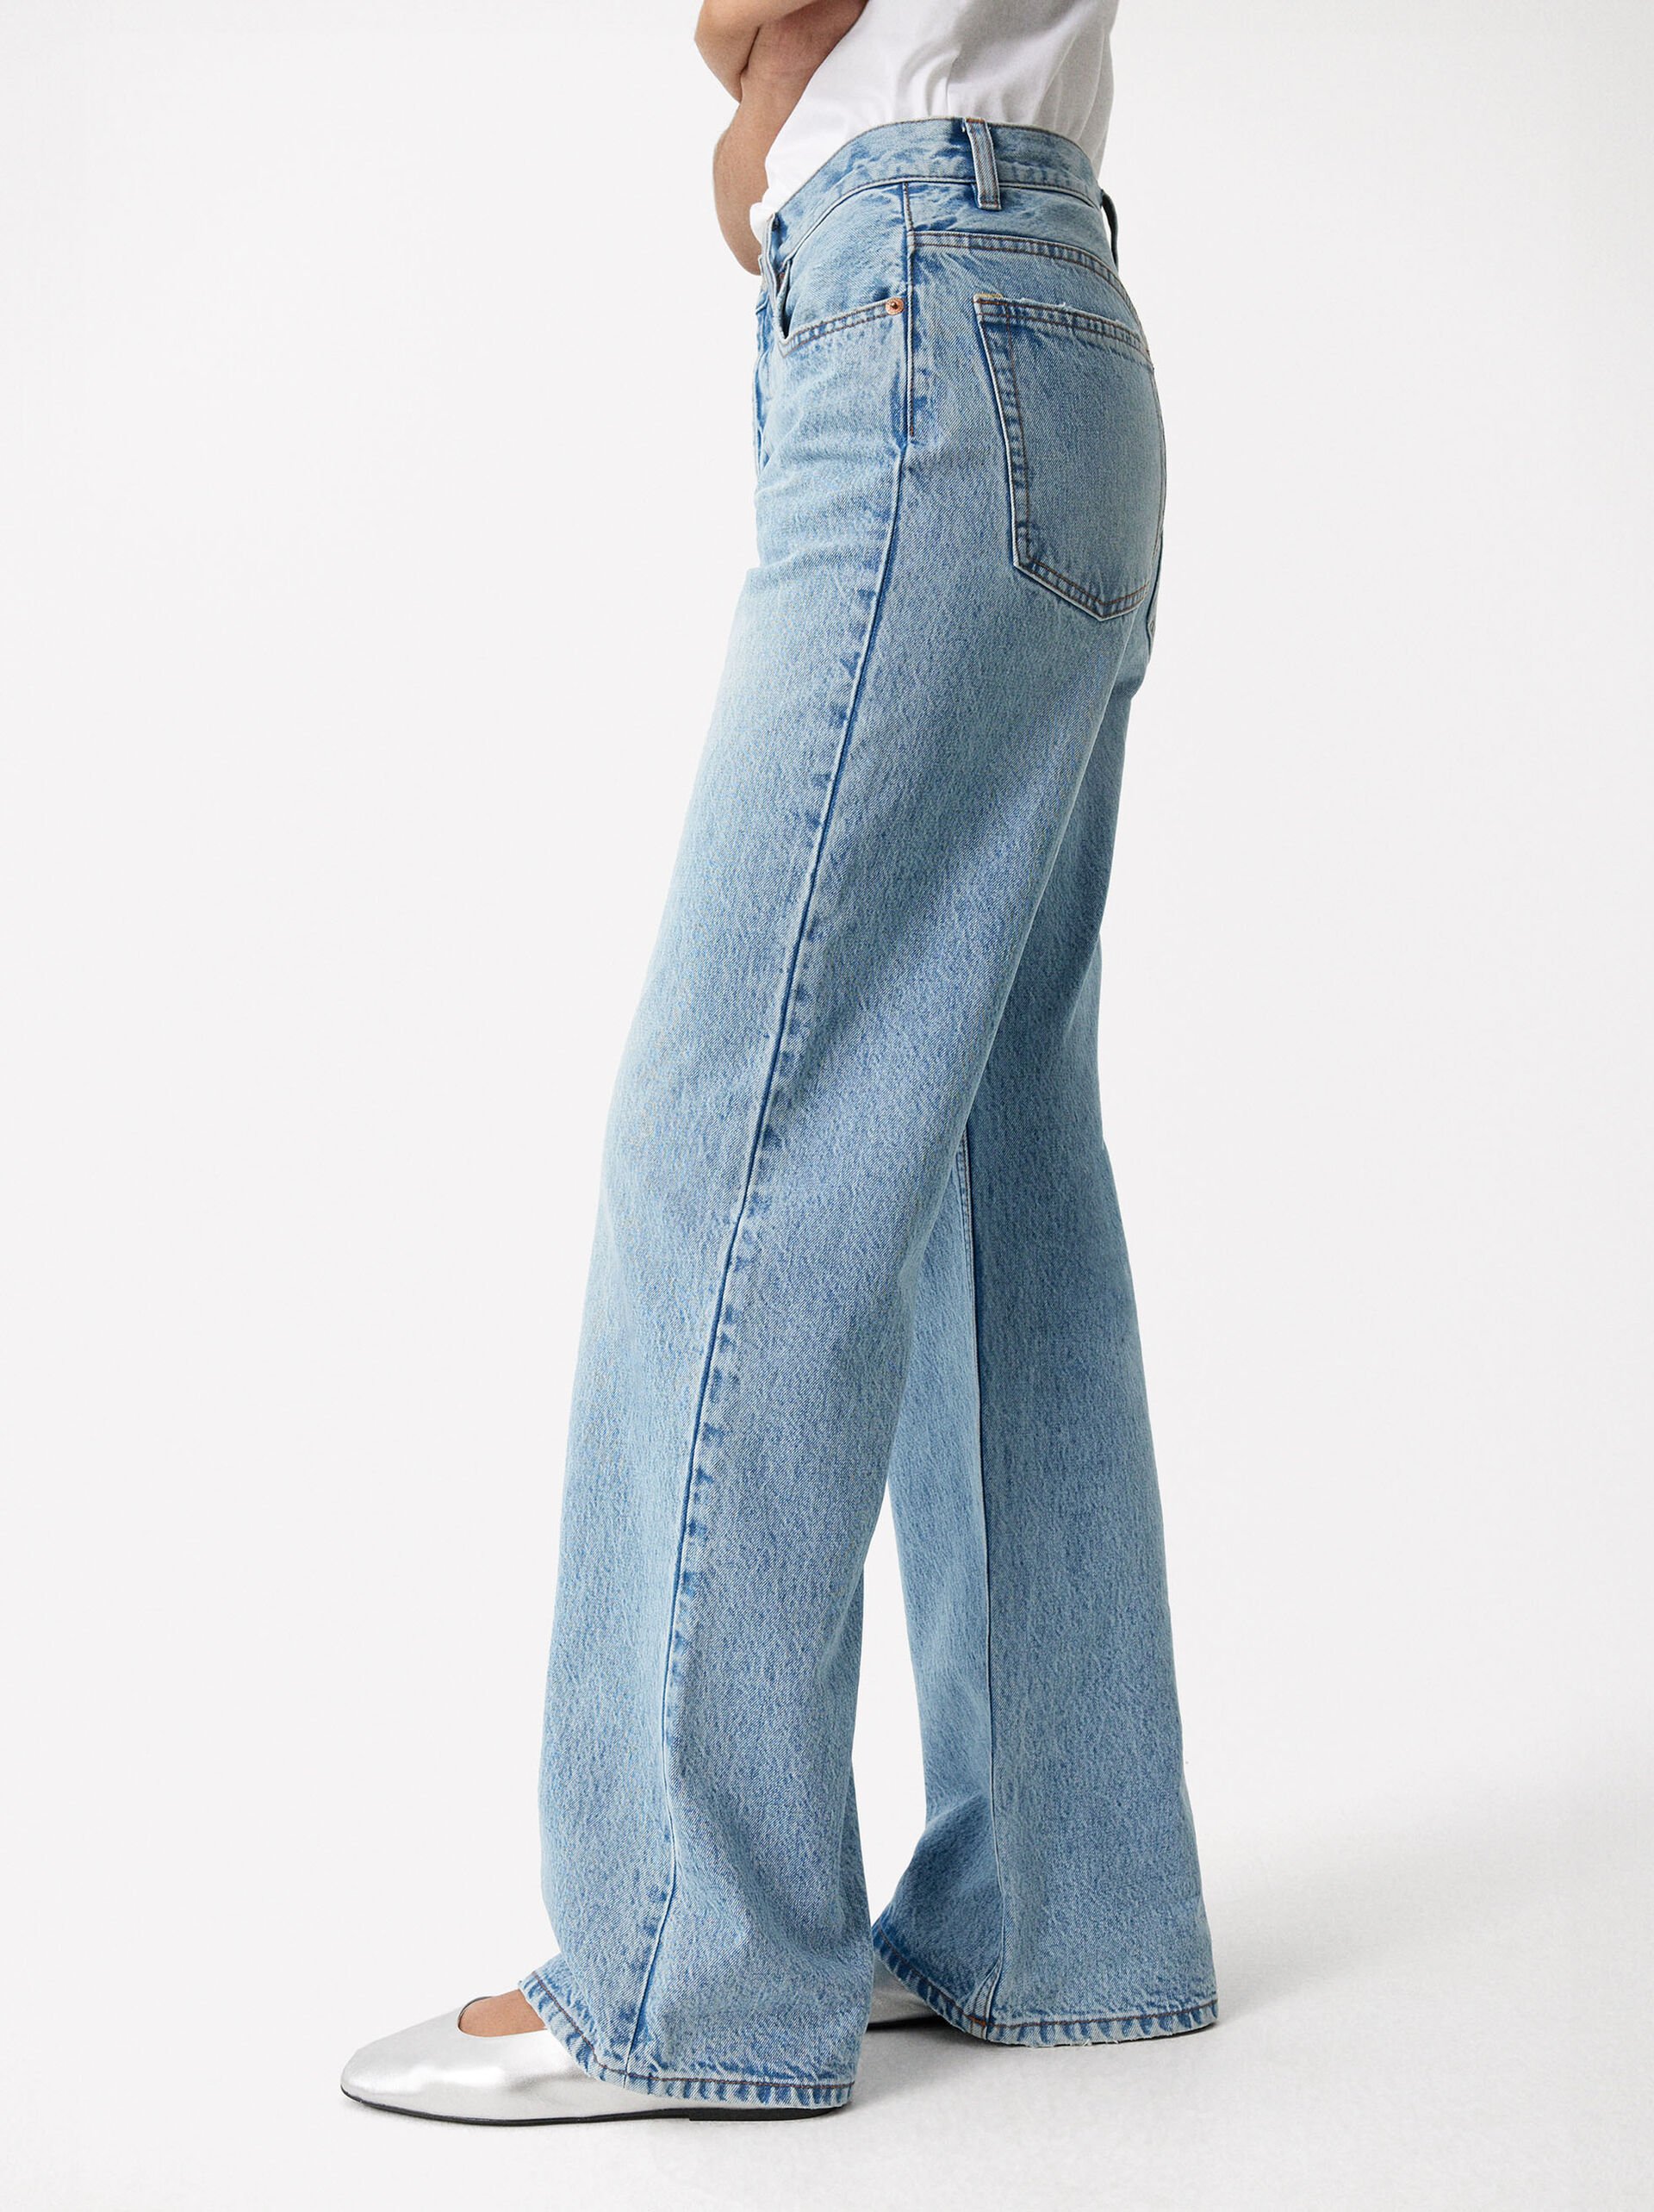 Jeans Dritti image number 4.0